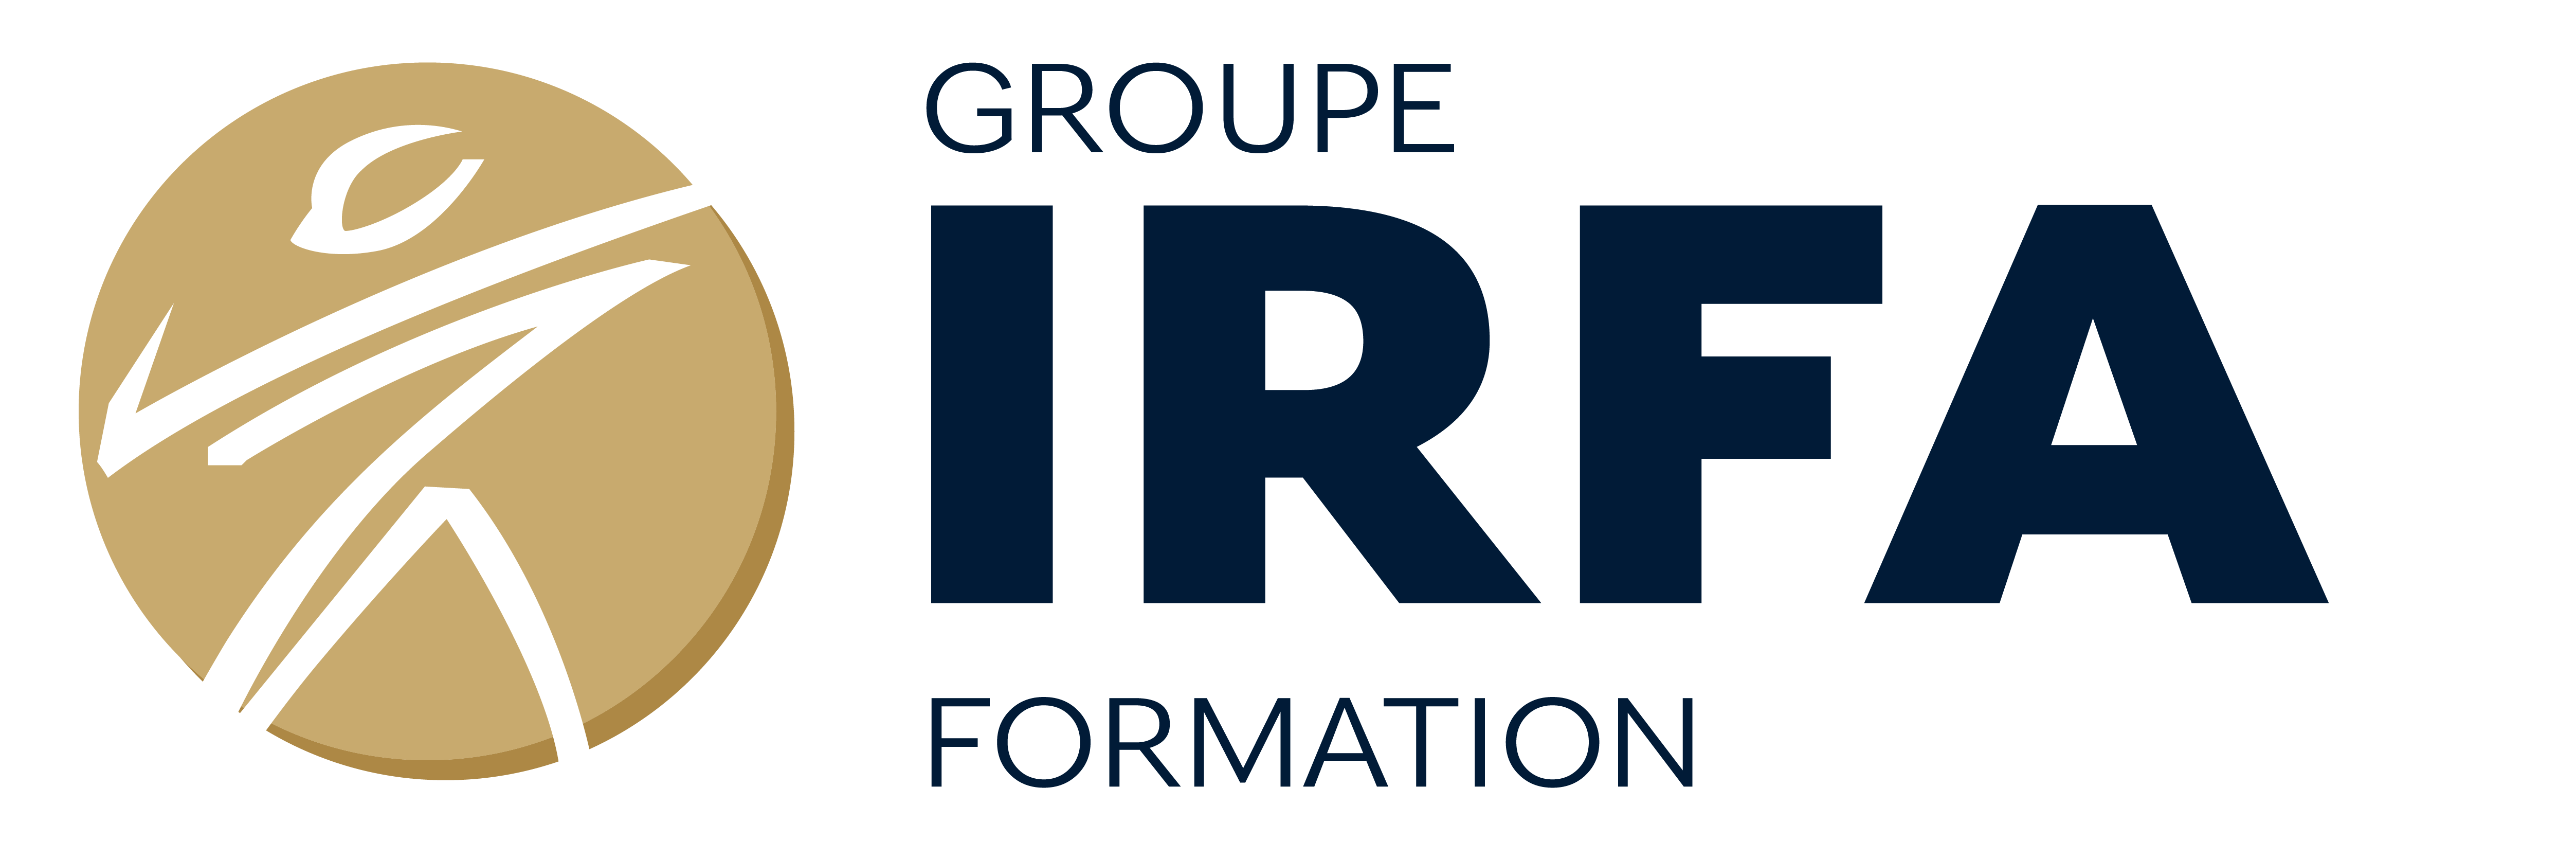 Le groupe IRFA FORMATION s'installe  Beauvais (60)